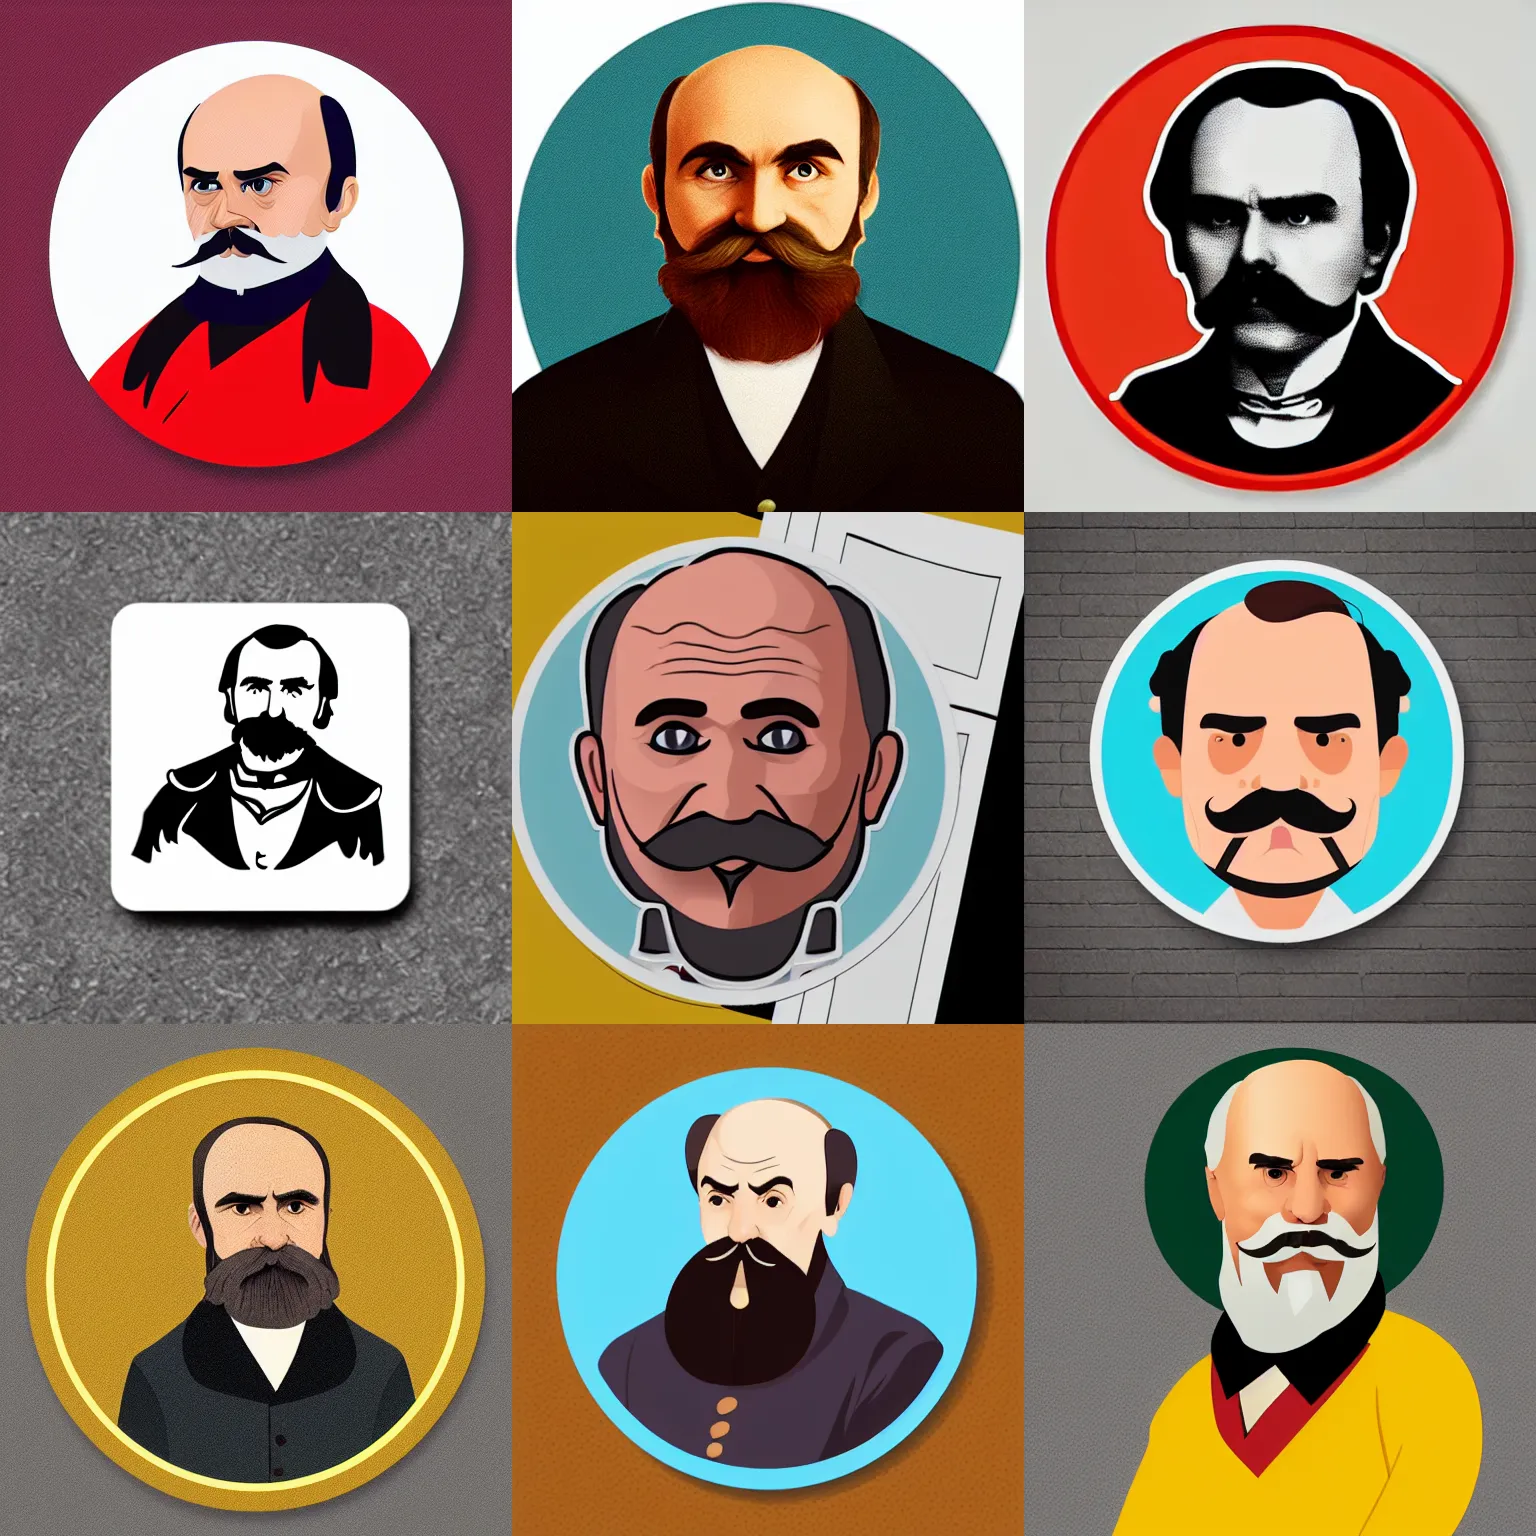 Prompt: circular sticker: Taras Shevchenko, he's old and balding, has long moustache but no beard, is in the style of 2D Disney, simple flat design based on real photographs